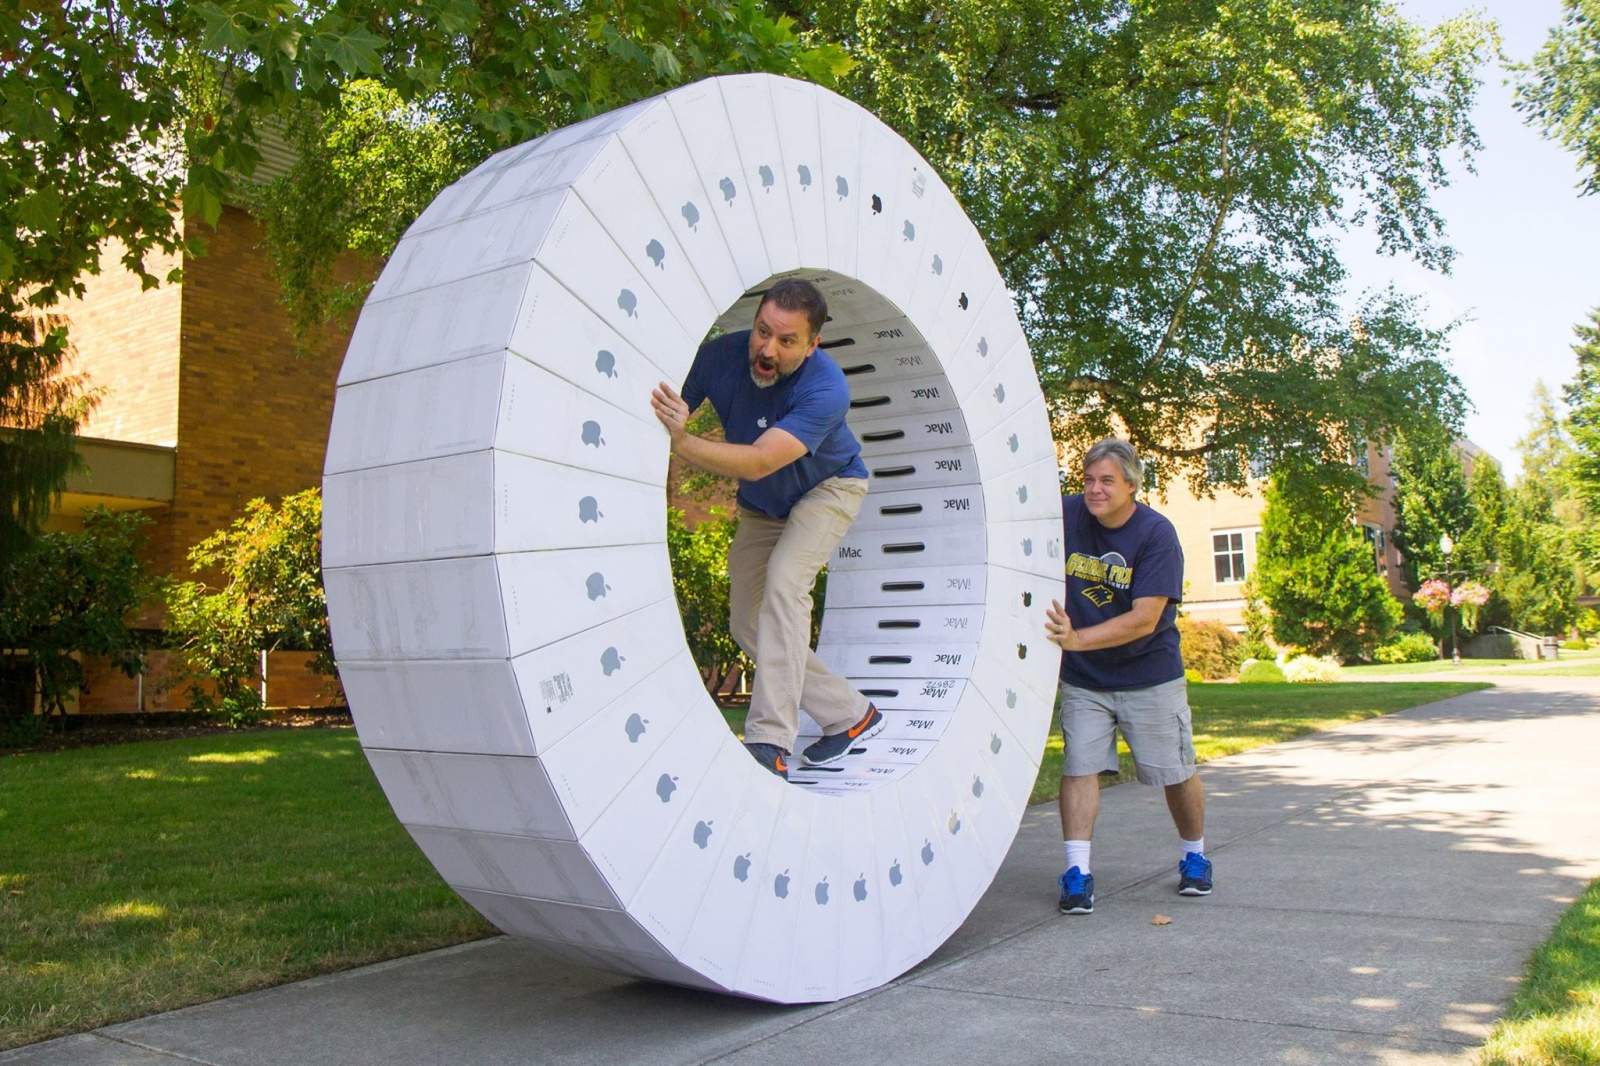 This cardboard hamster wheel would cost you $1800 make... and that's if you bought the boxes empty.